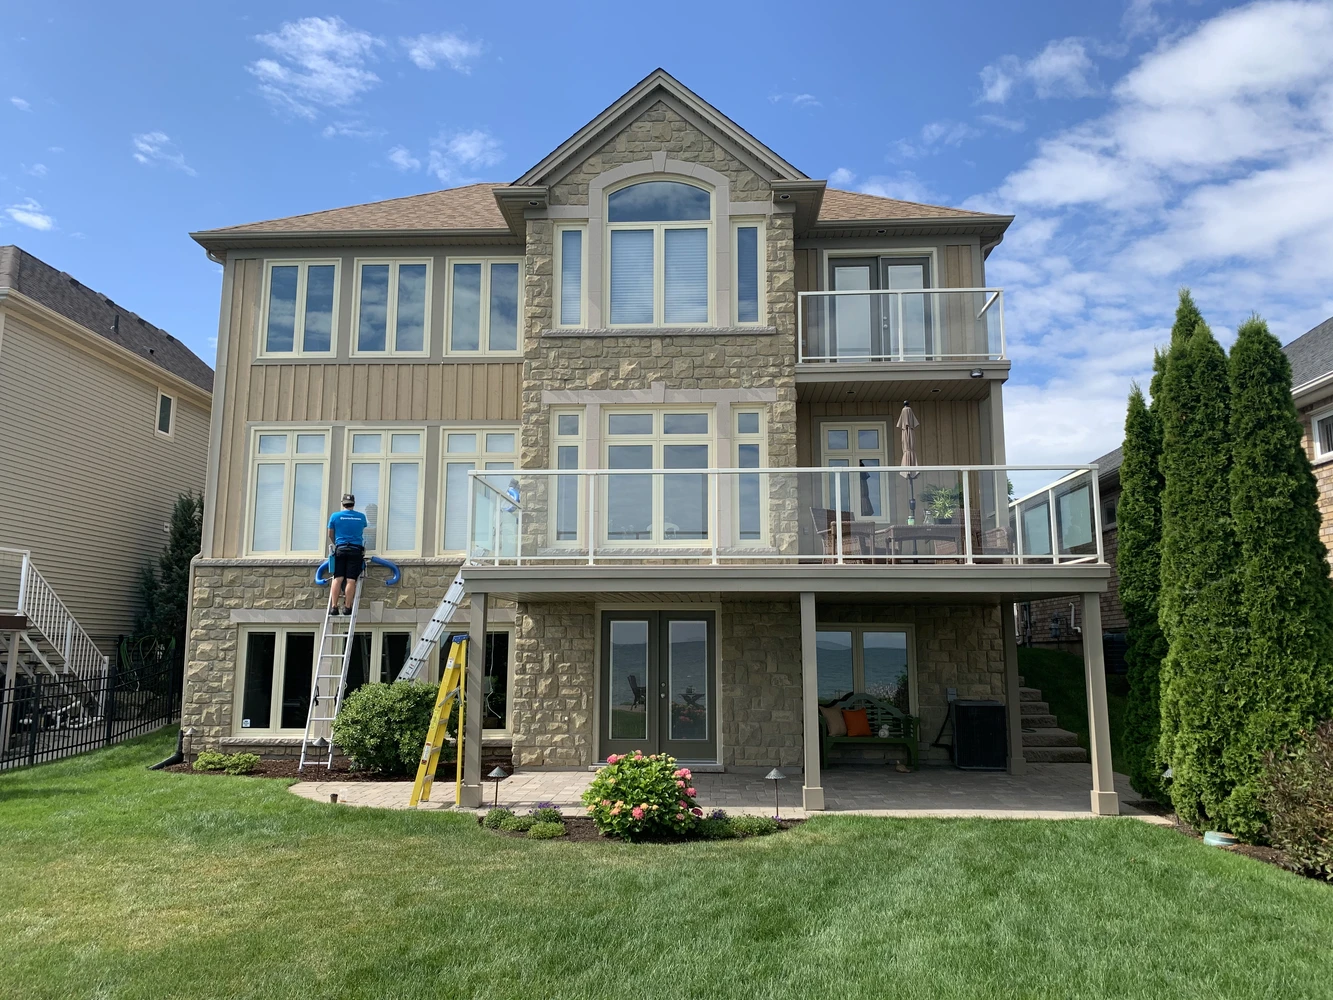 Niagara house having a residential window cleaning service performed